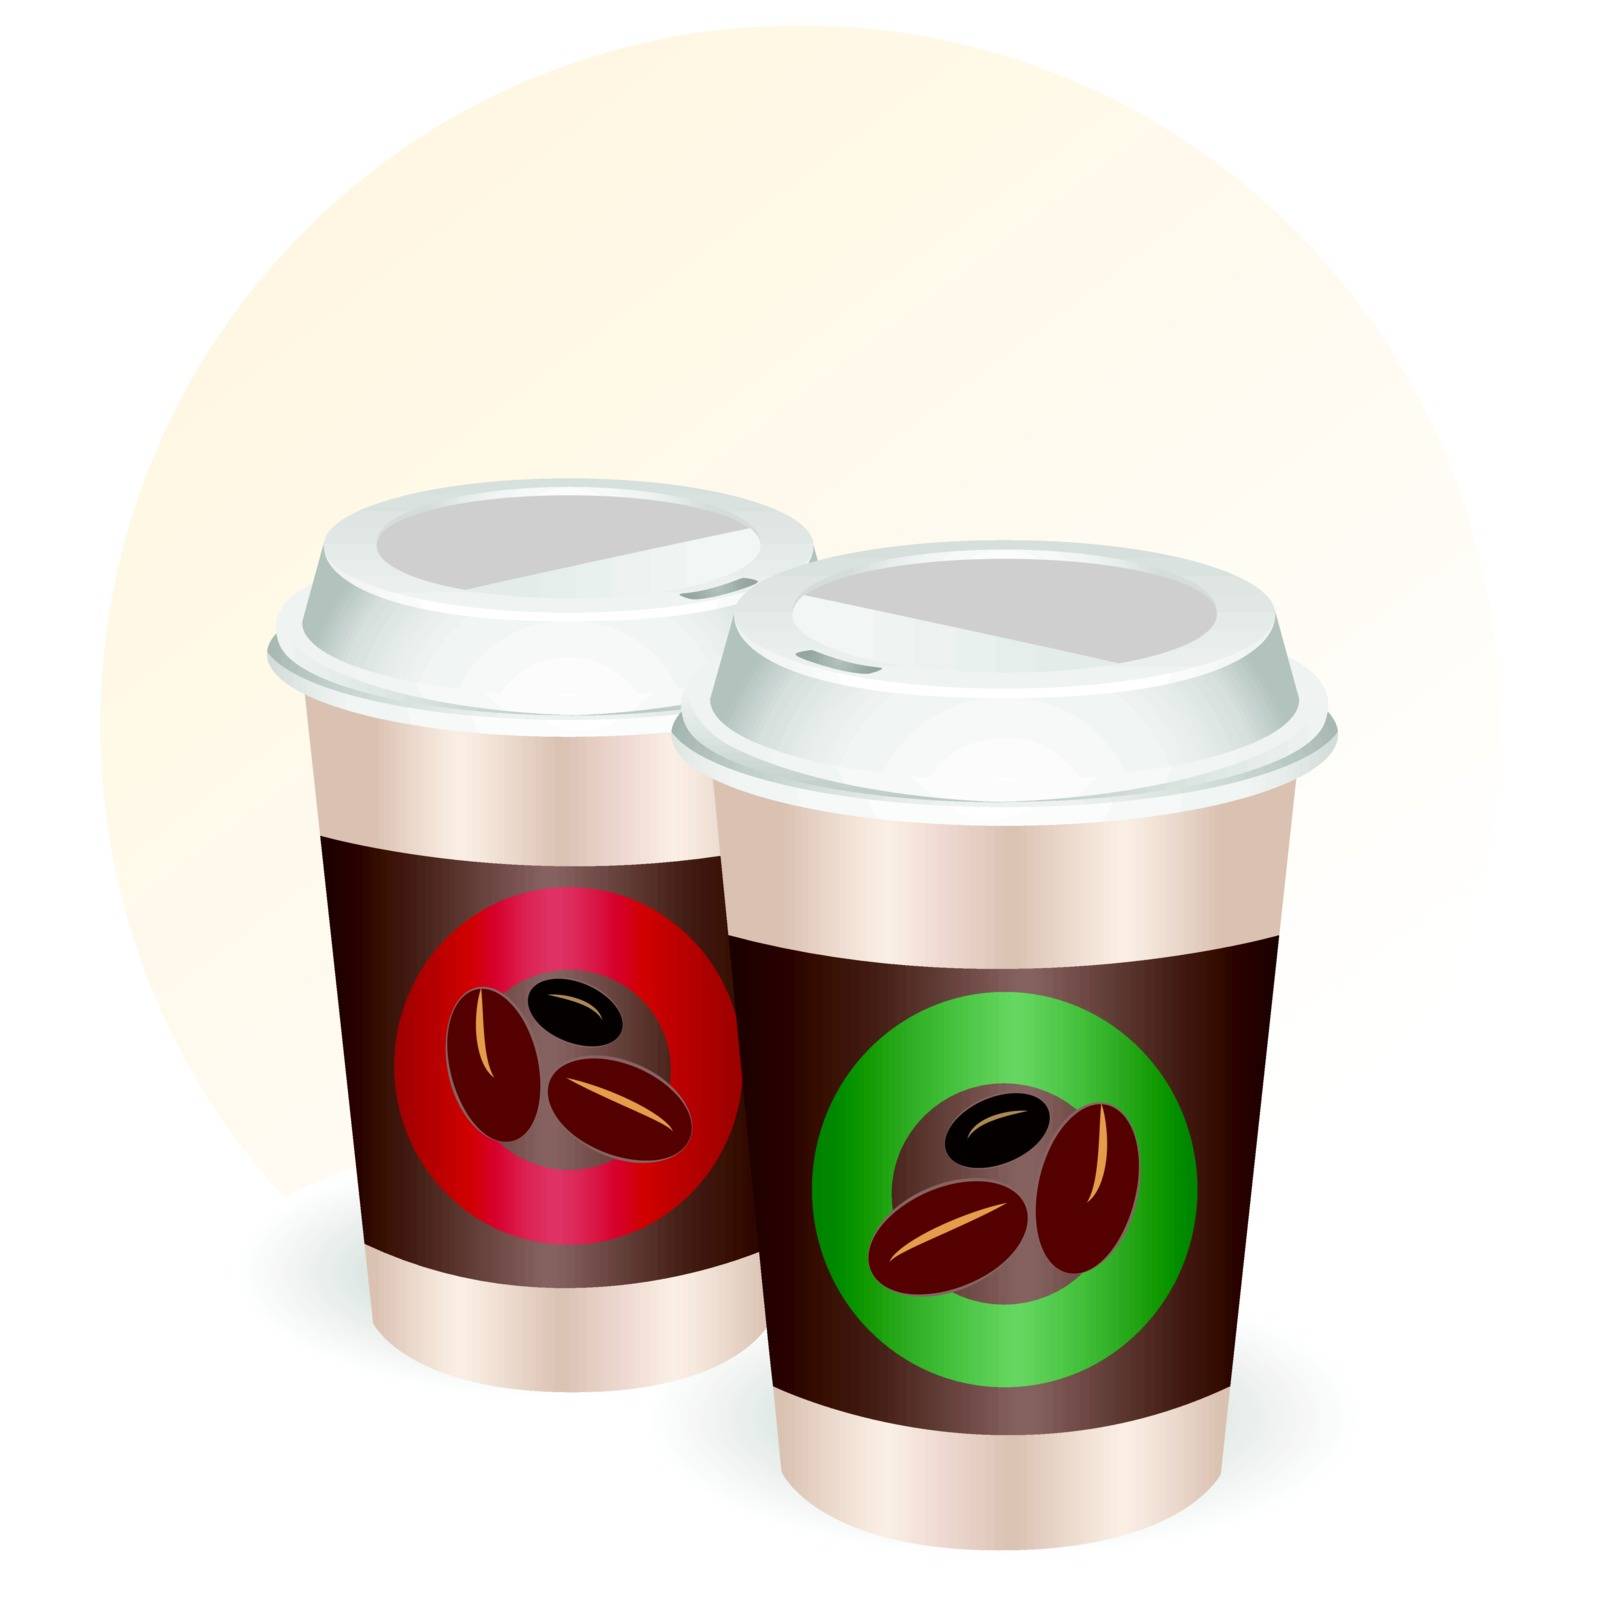 Coffee cups to go by Coline